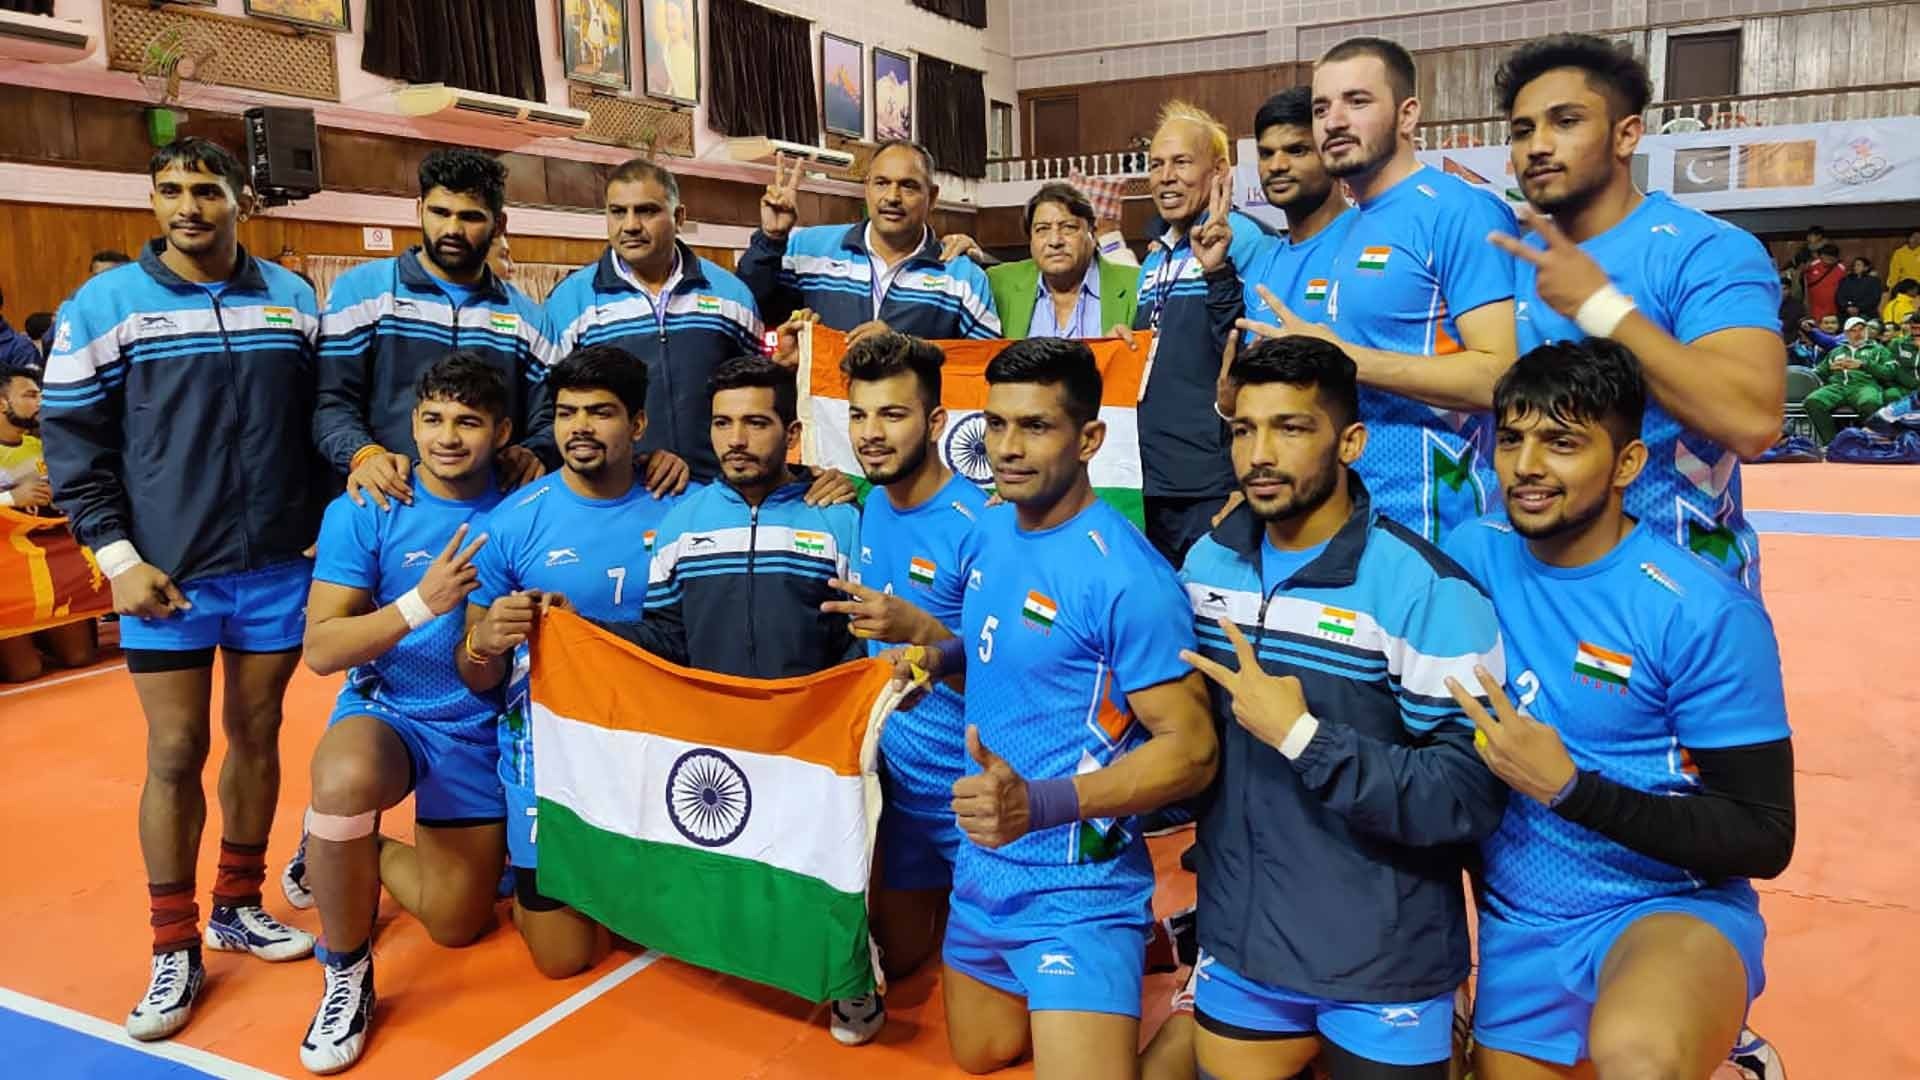 The Domination of the Indian Kabaddi team in the Kabaddi World Cup